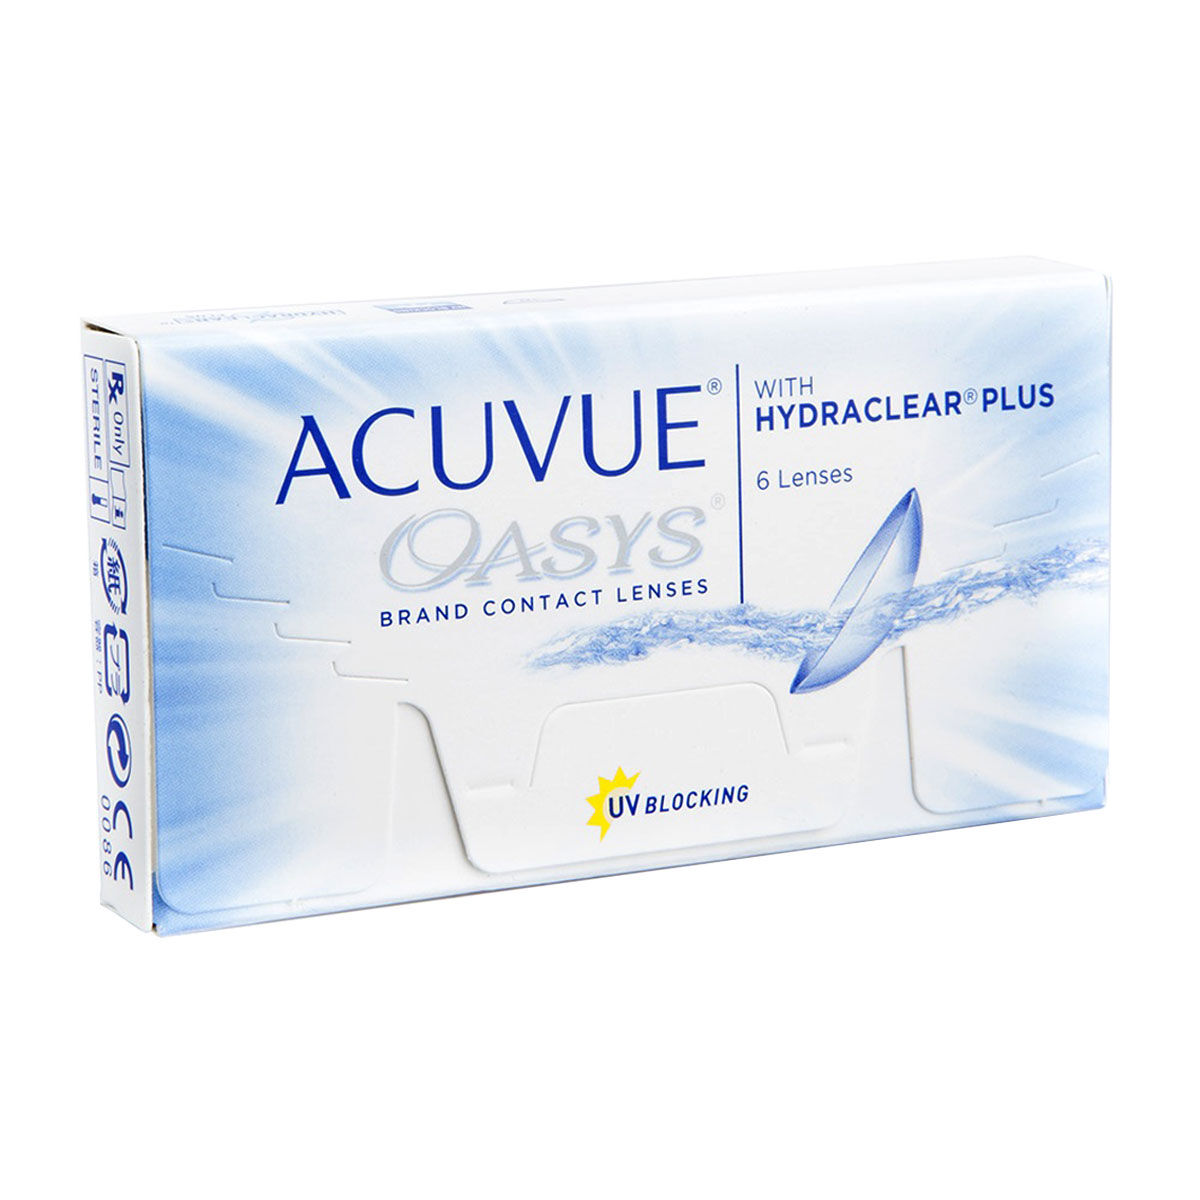 Acuvue Oasys with Hydraclear Plus (6 Contact Lenses), Johnson & Johnson, Extended Wear Silicone Hydrogel, Senofilcon A